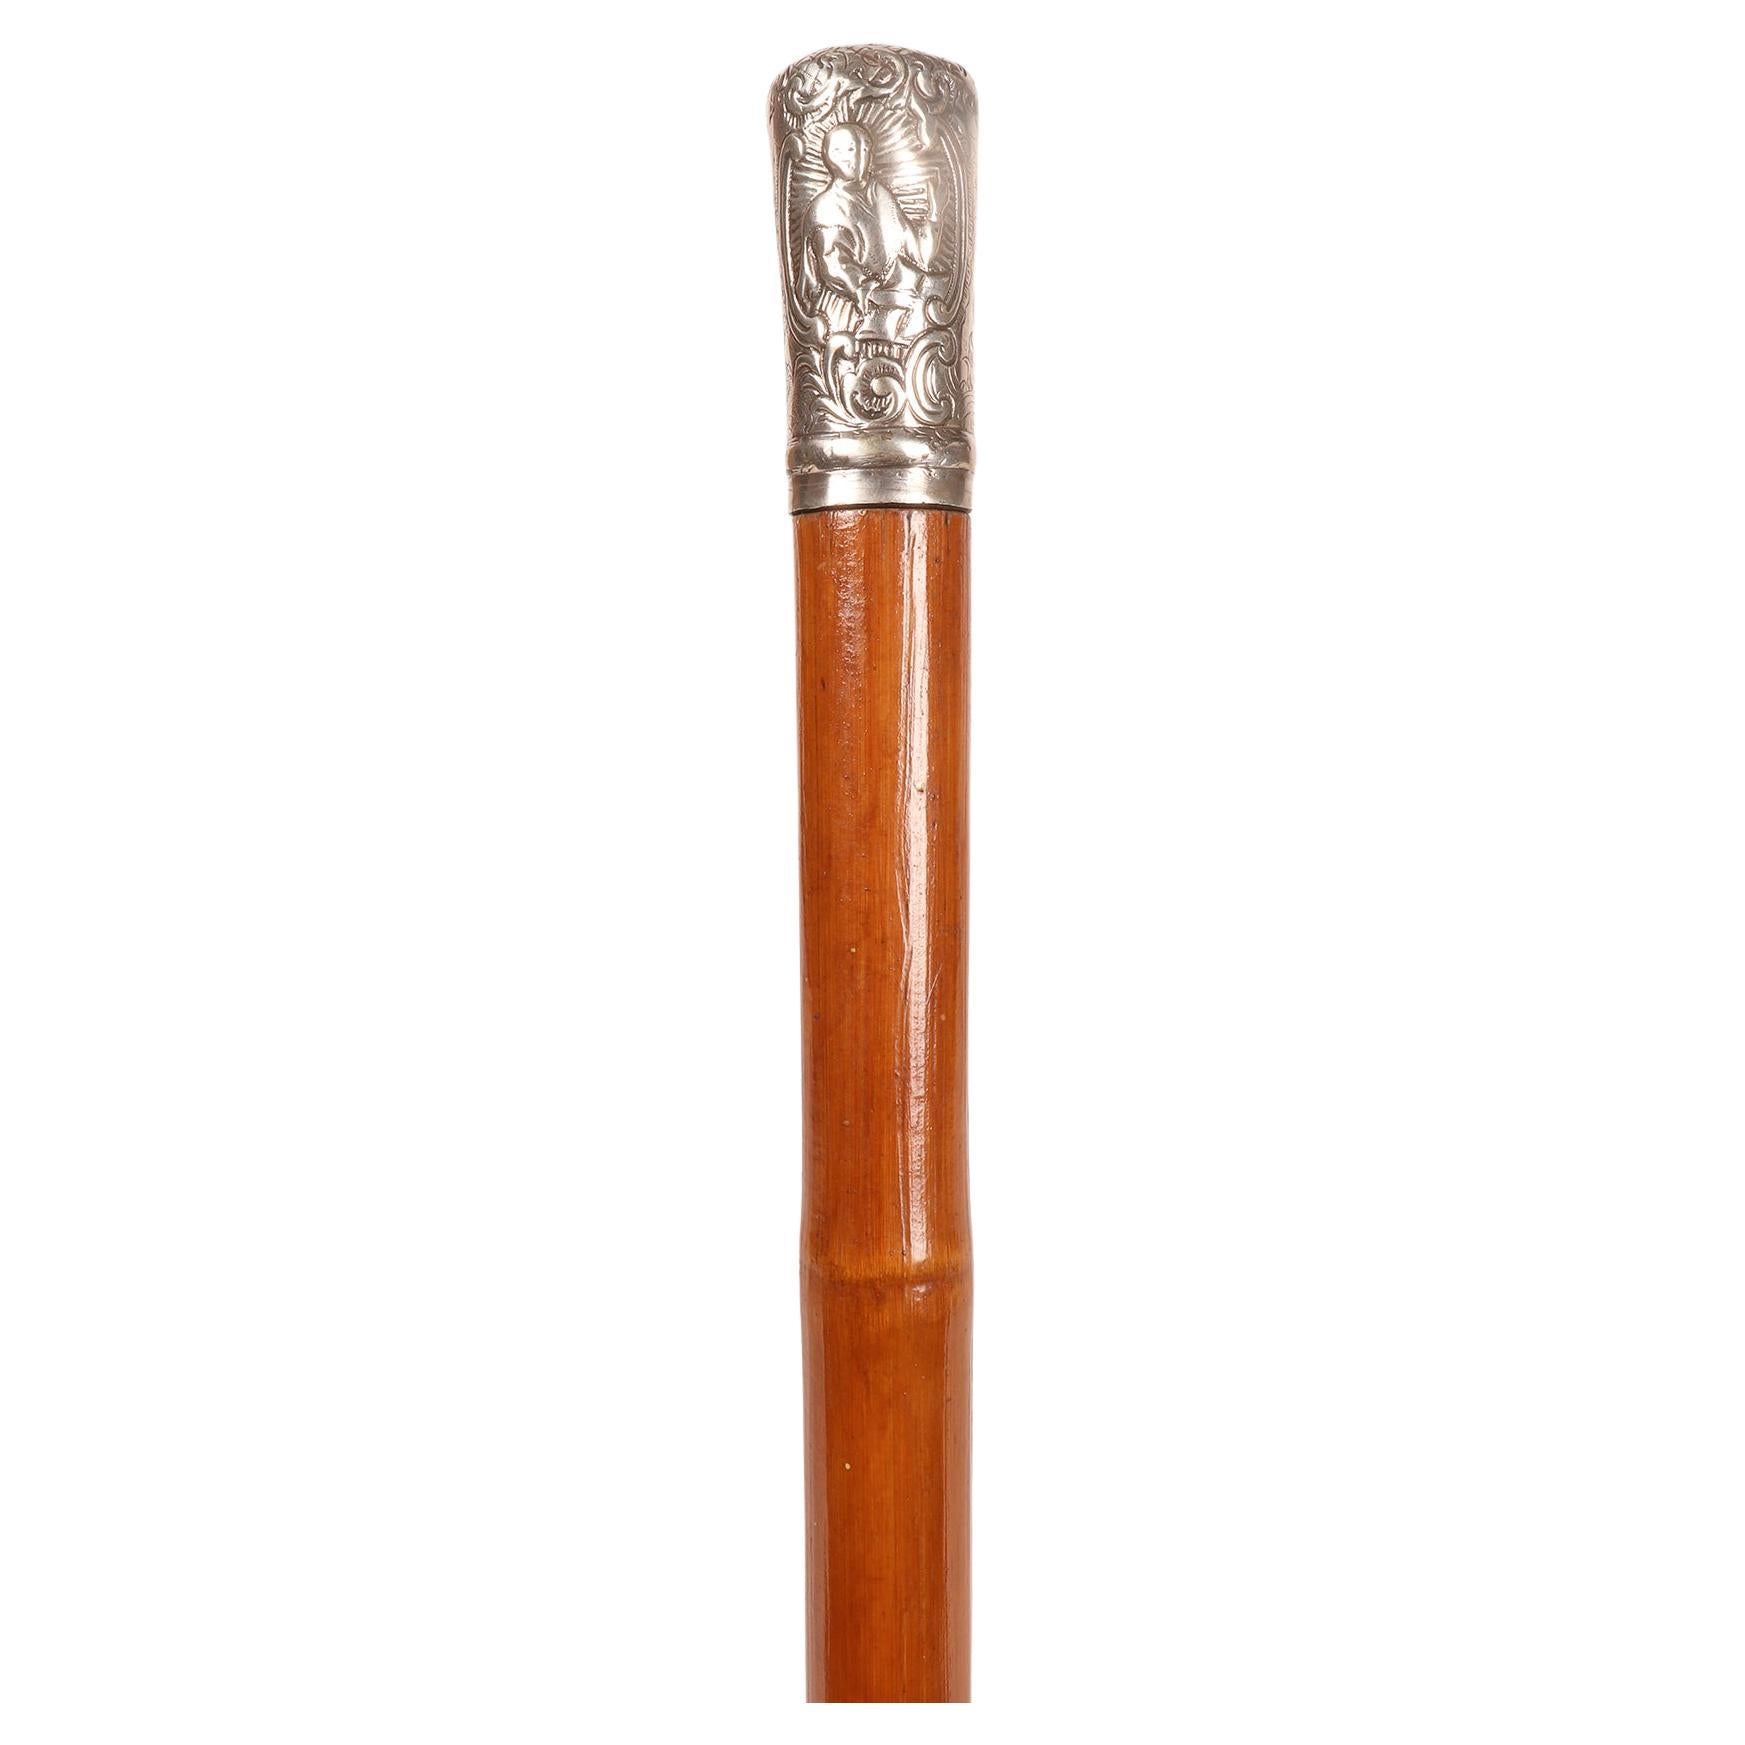 Customs officer's walking stick for goods inspection, Germany, 1870. For Sale